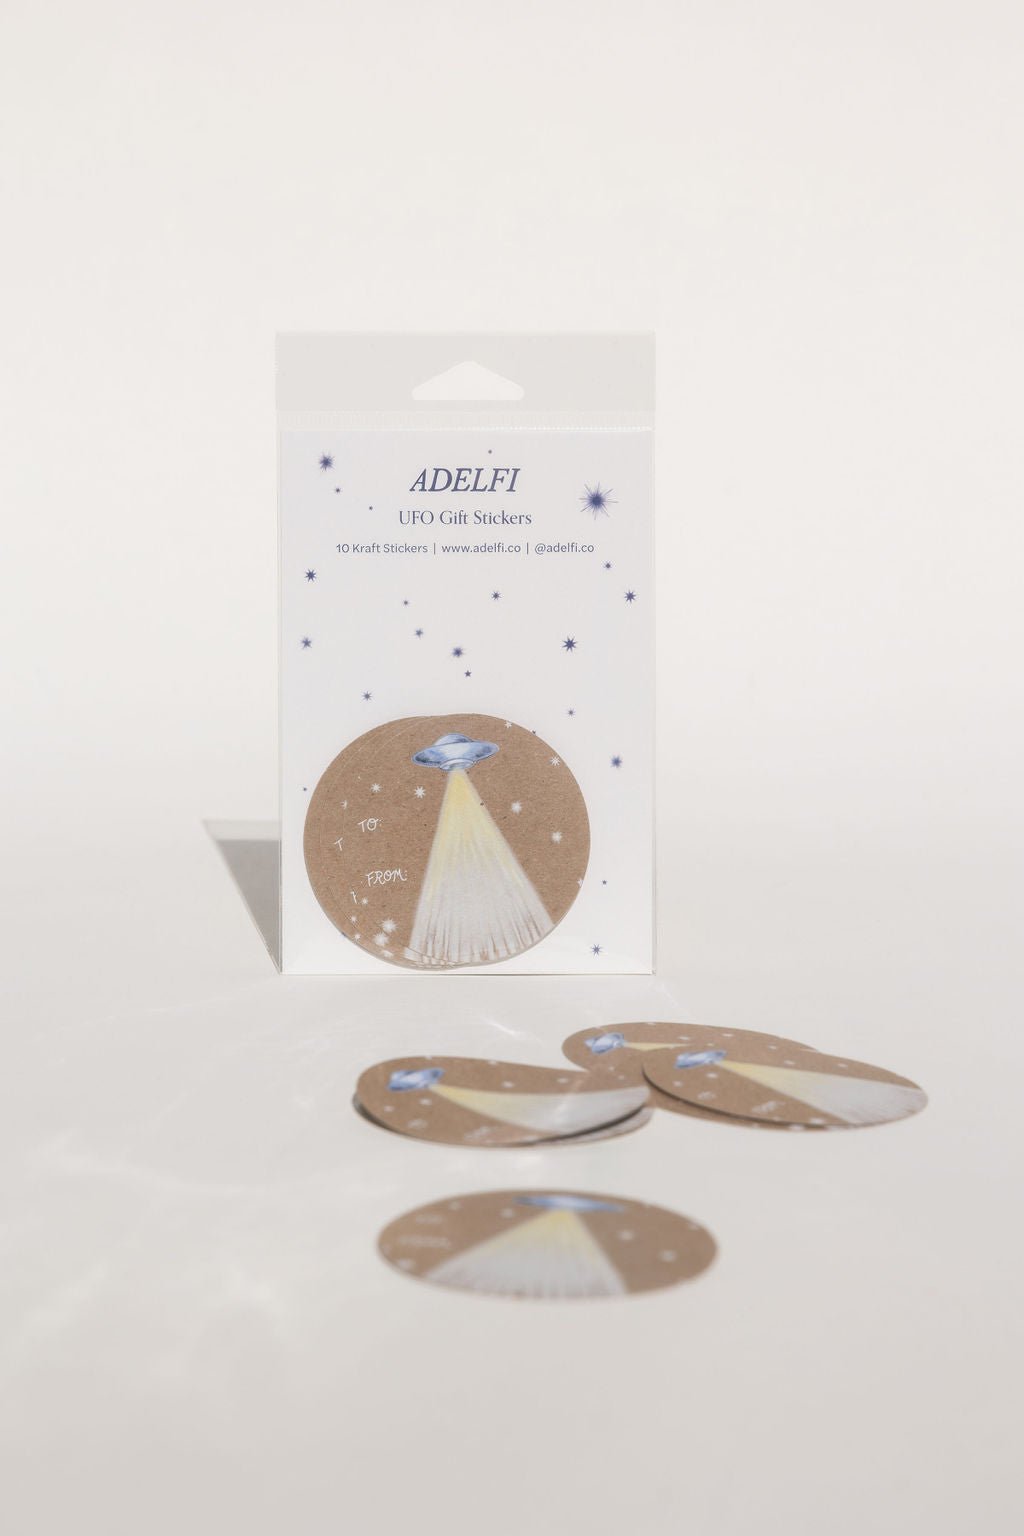 This Gift Sticker features a blue-silver UFO with a light beam surrounded by stars, with the words "To" and "From" written in cursive on the center left.